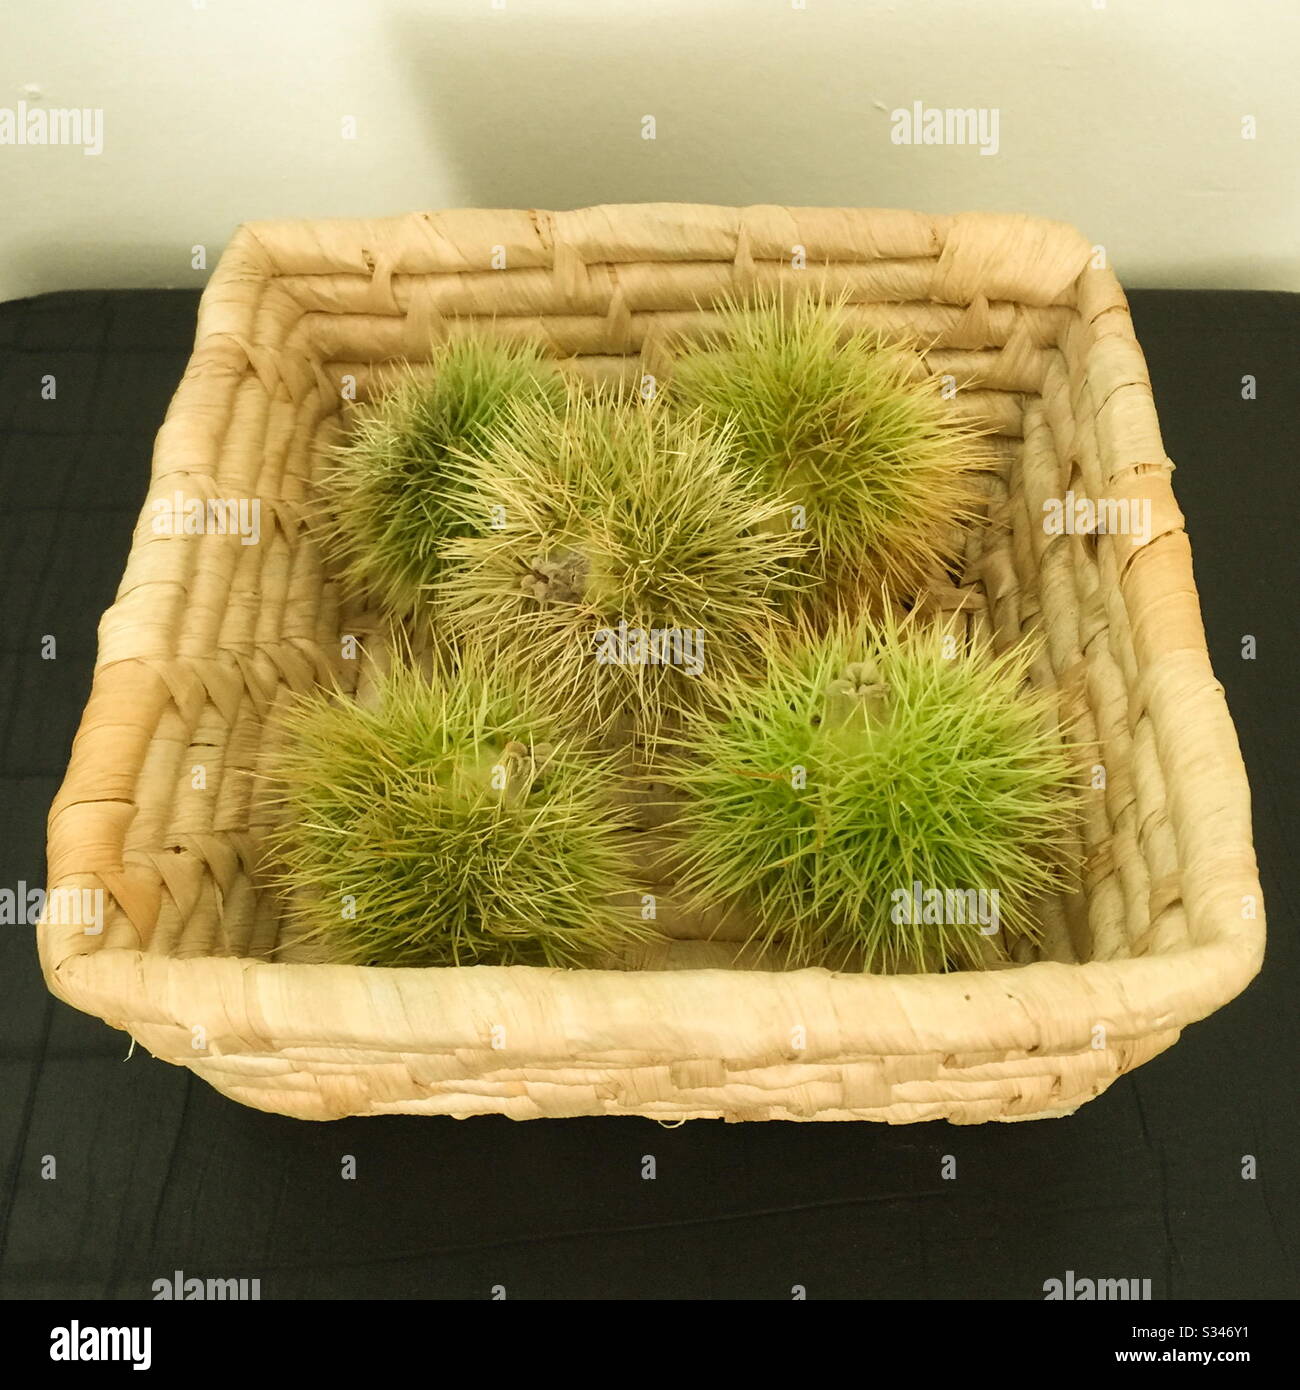 Seed heads artistically set in basket Stock Photo